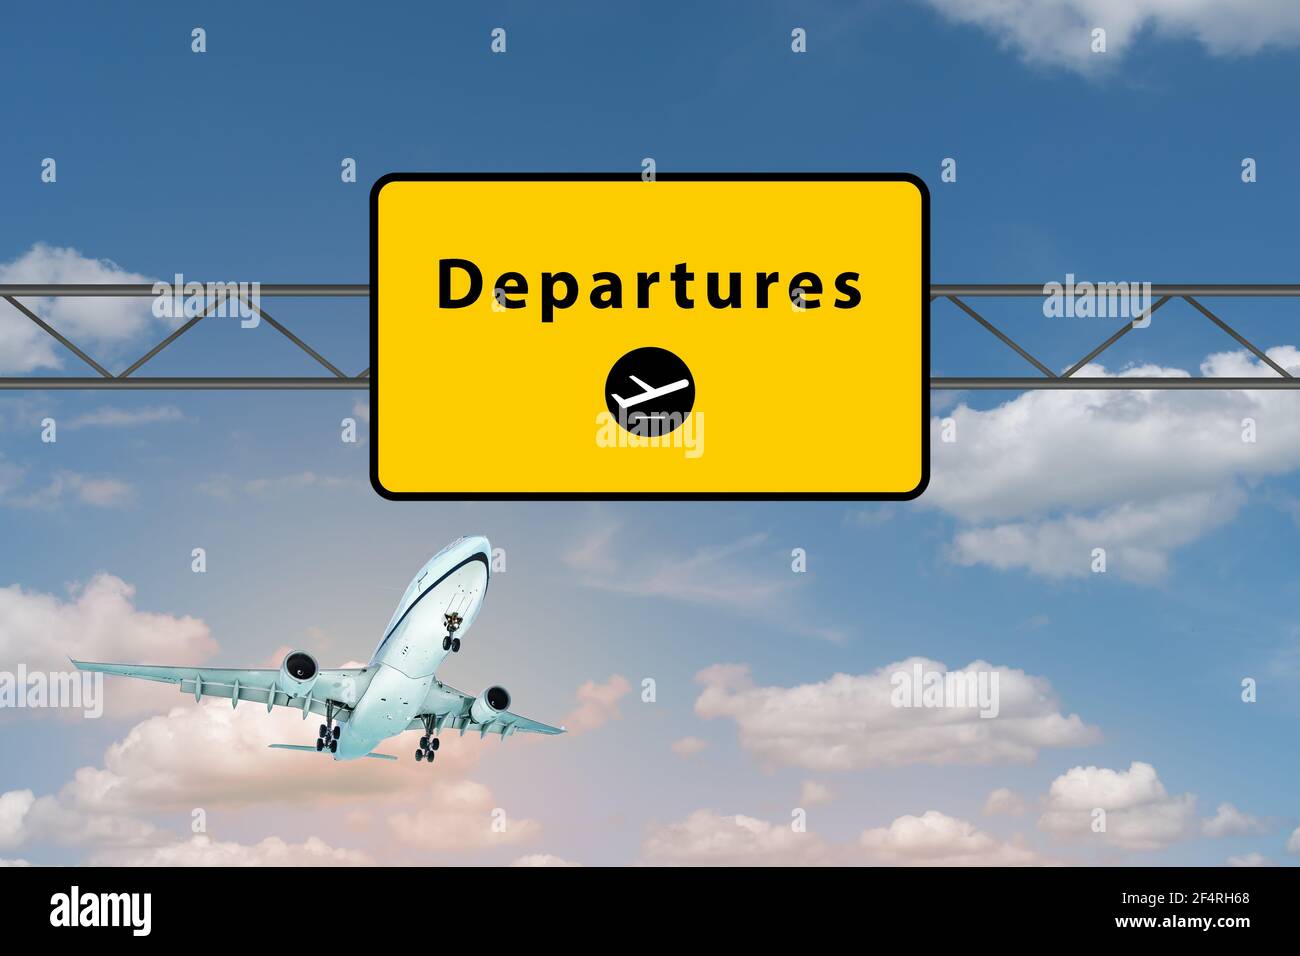 Departures airport sign above highway. Landing airplane in the sky. Stock Photo